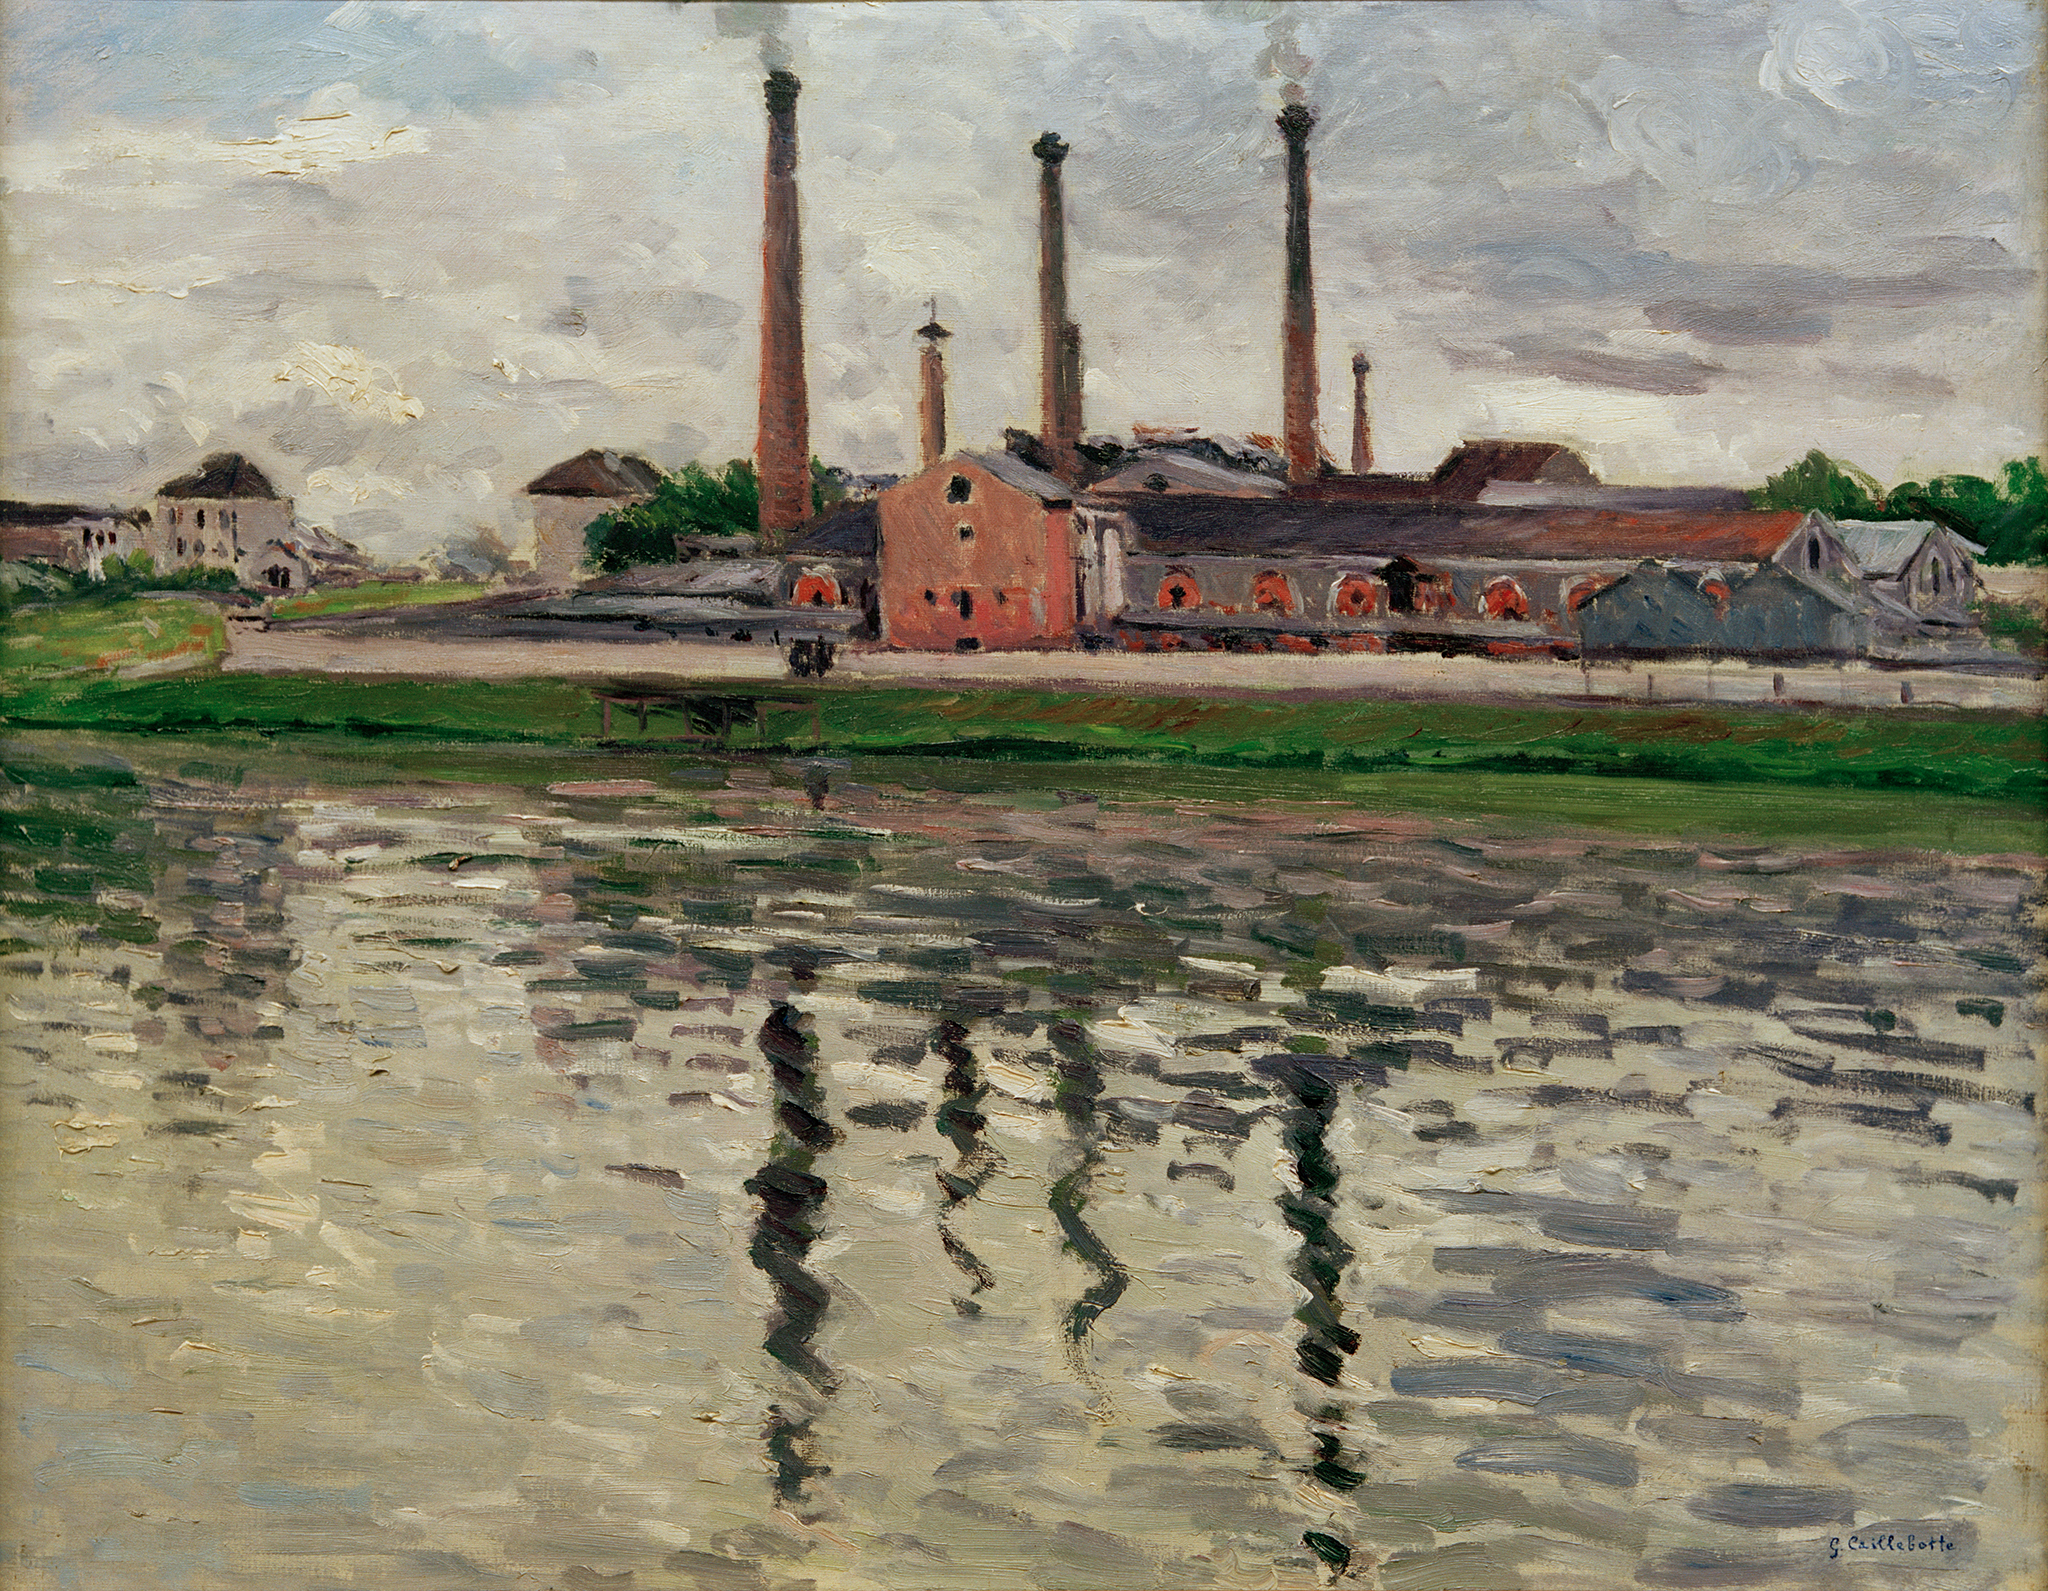 A painting showing a red and gray factory along a green shoreline. The factory has four brick chimneys around it. In the foreground, there is a river which it water is reflecting the factory behind it. The blue sky has been covered by gray clouds.